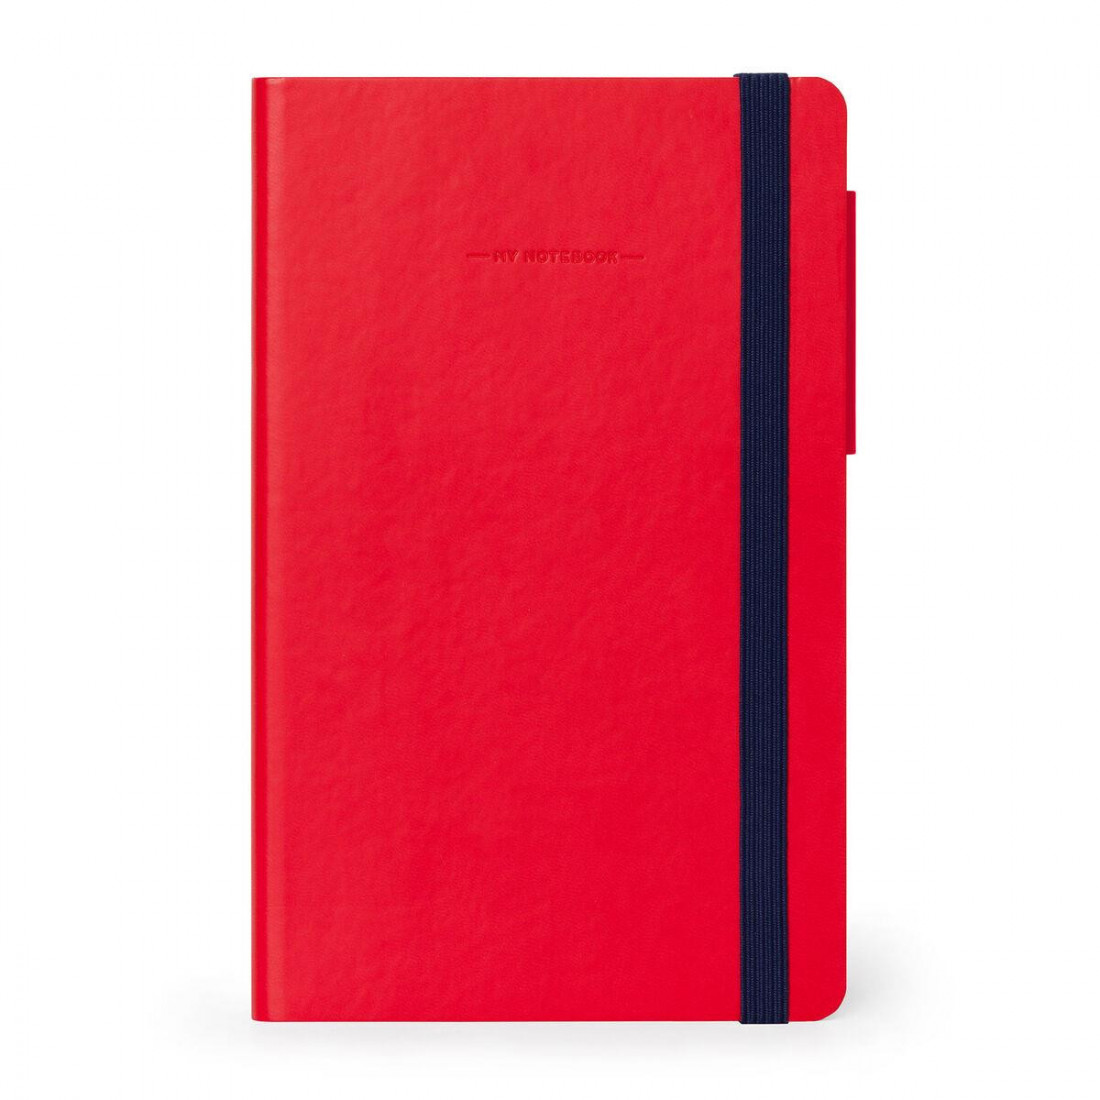 My Notebook - Lined - Medium - Red Cover LEGAMI